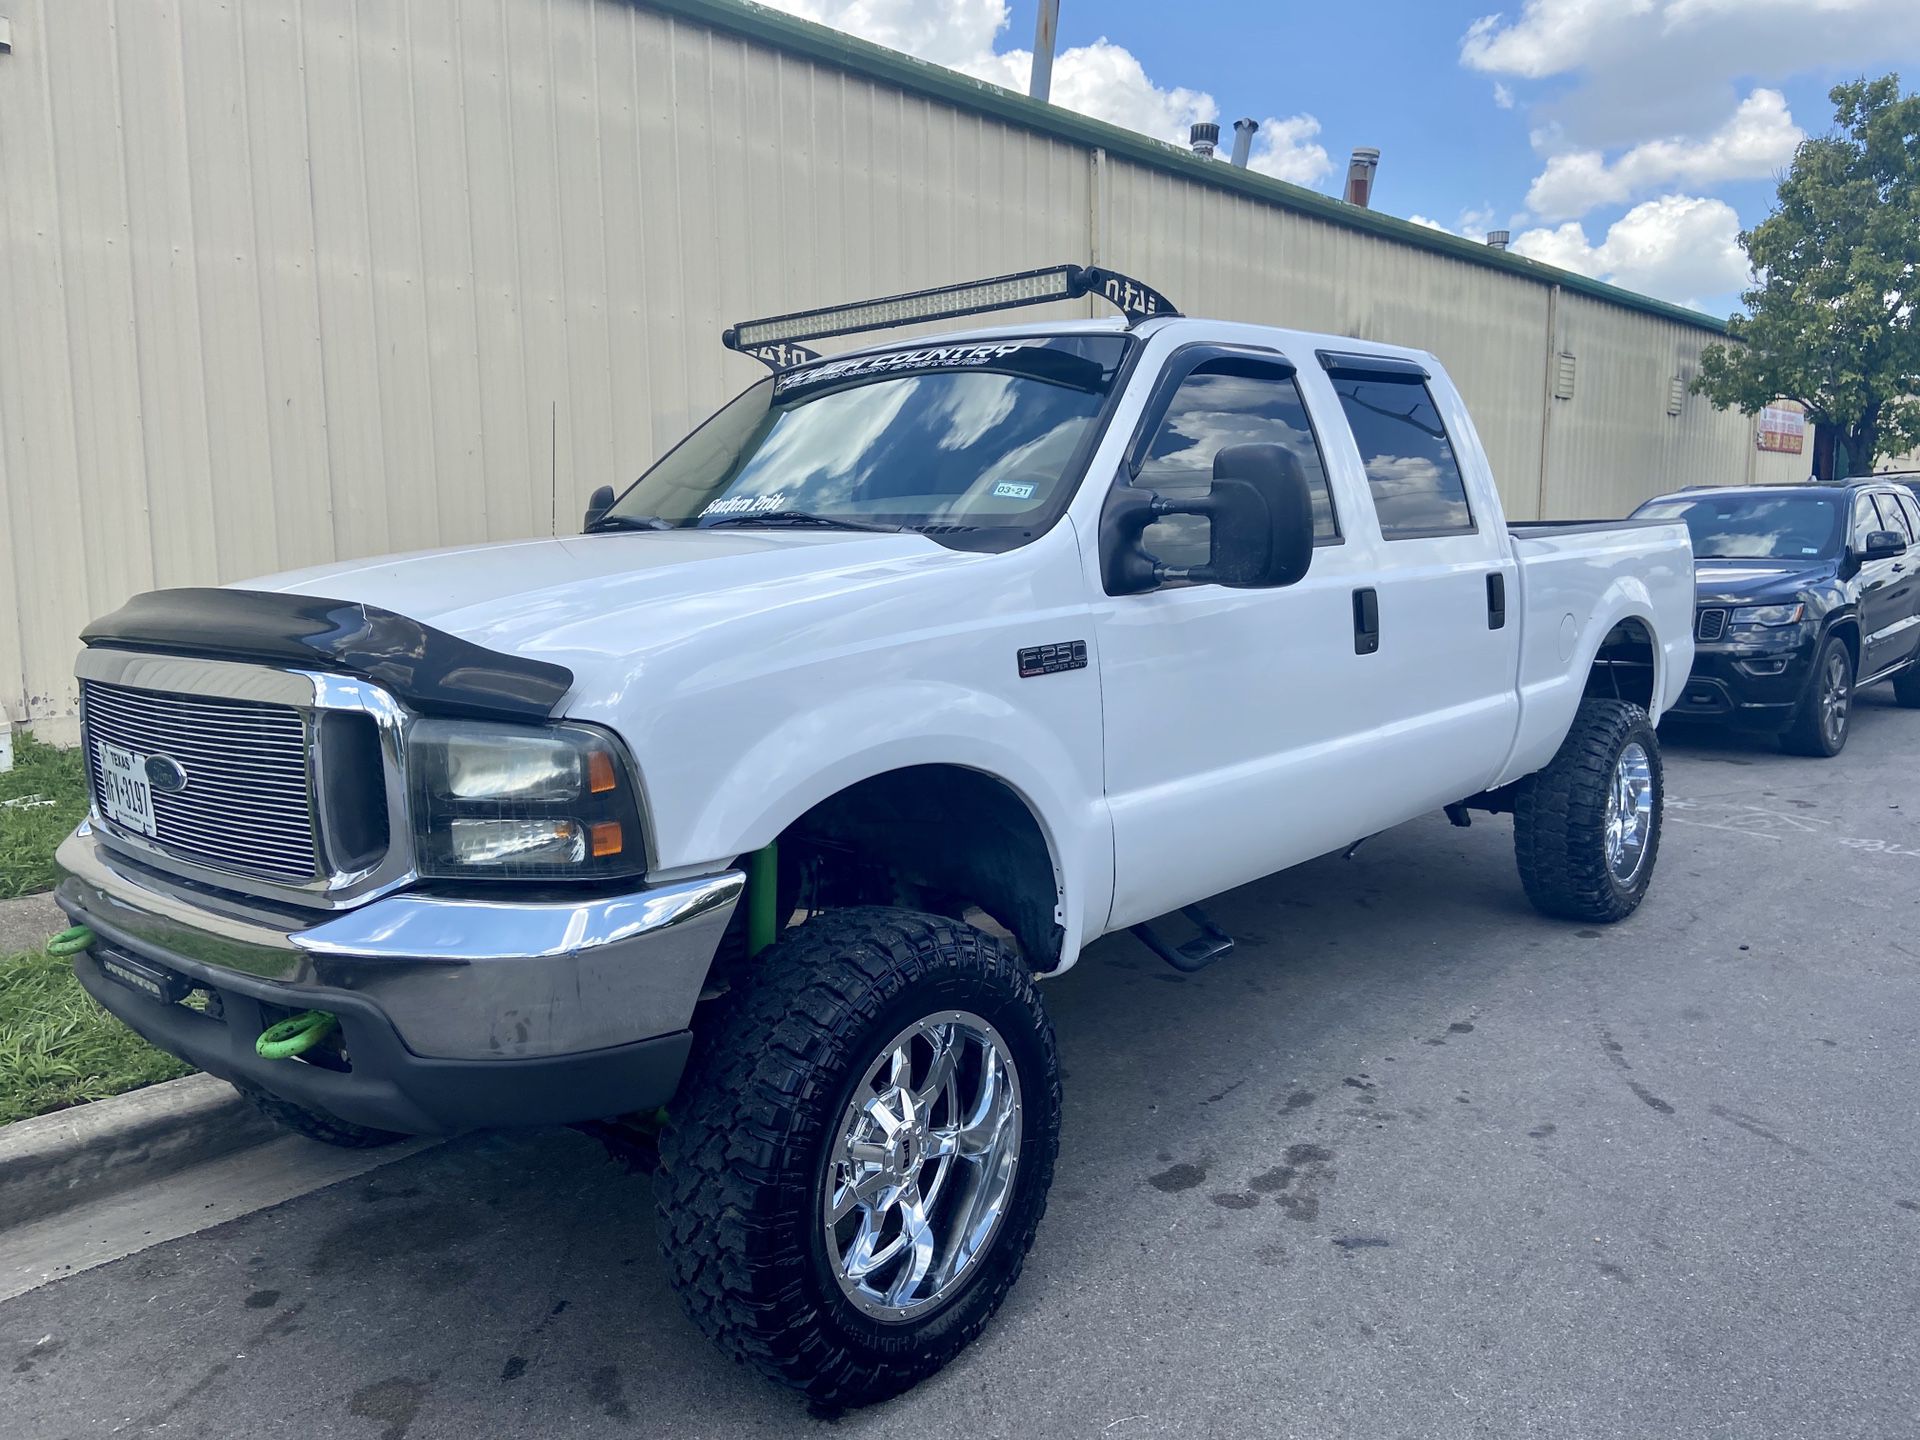 2000 ford f250 4x4 auto 6.8 v10. a/c gas 130 k miles clean title lifted high rim 22